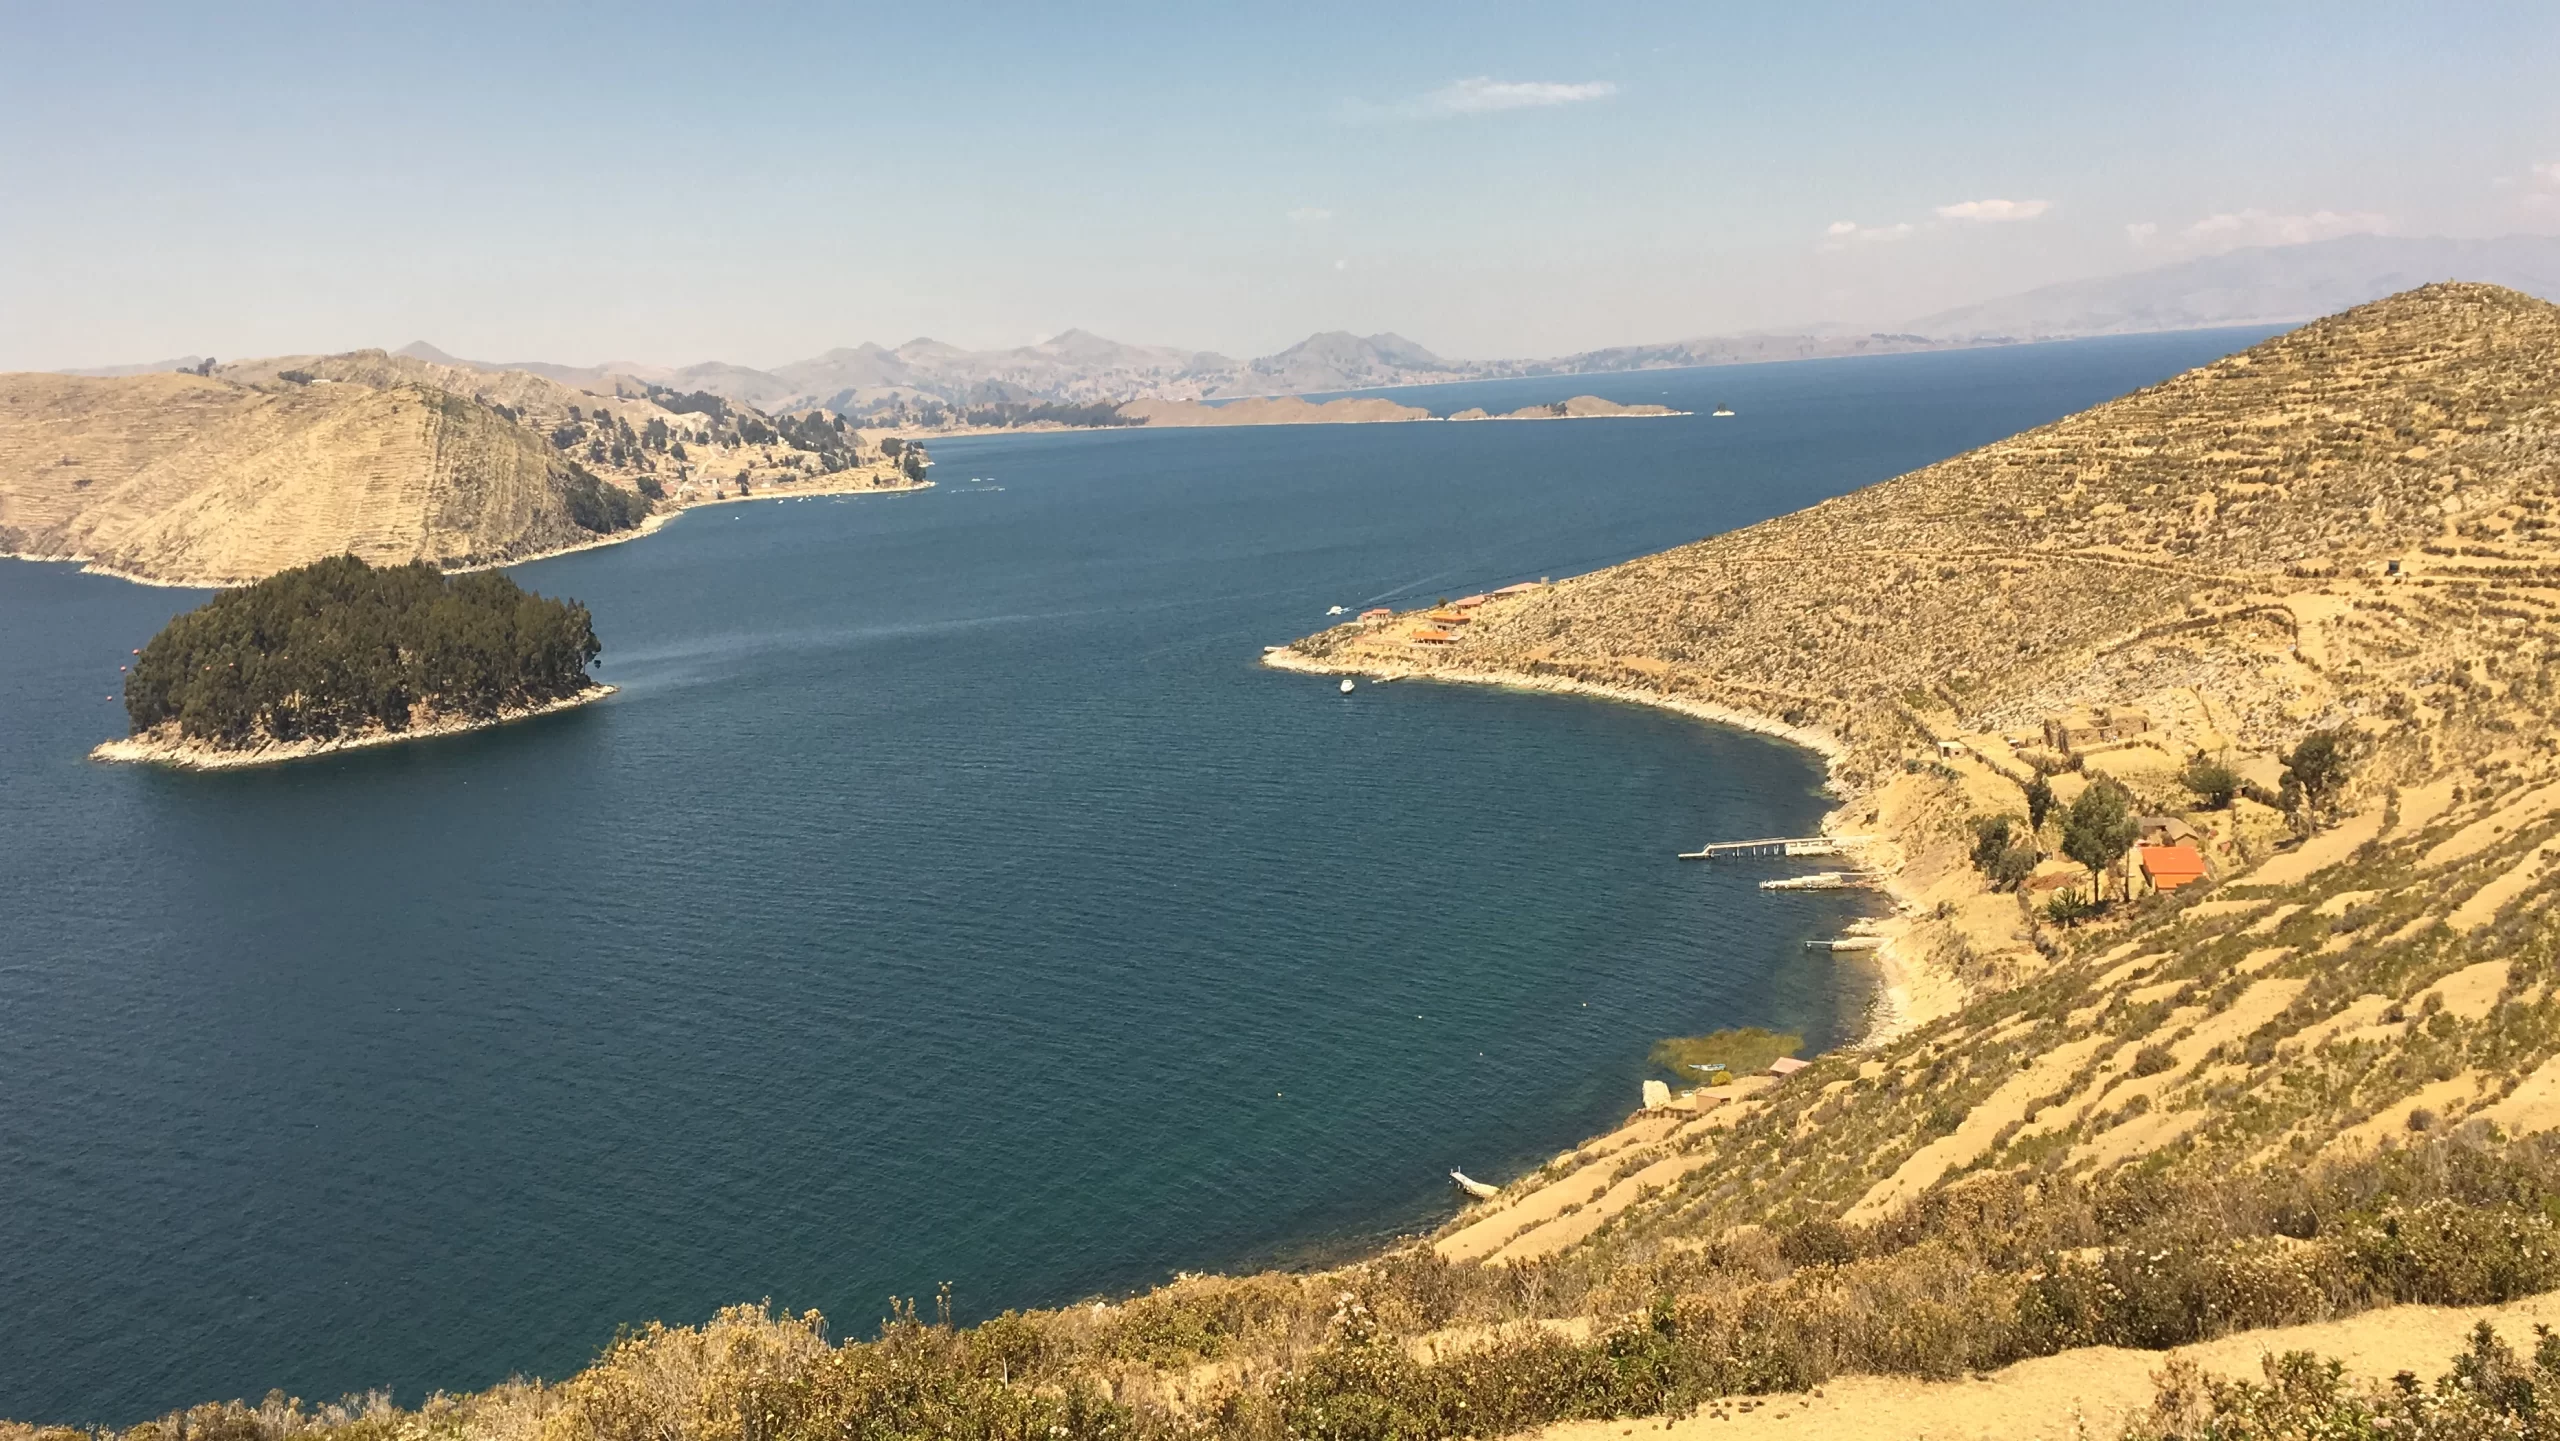 Isla del Sol Bolivia scaled - Lake Titicaca - Peru's largest and most mysterious lake